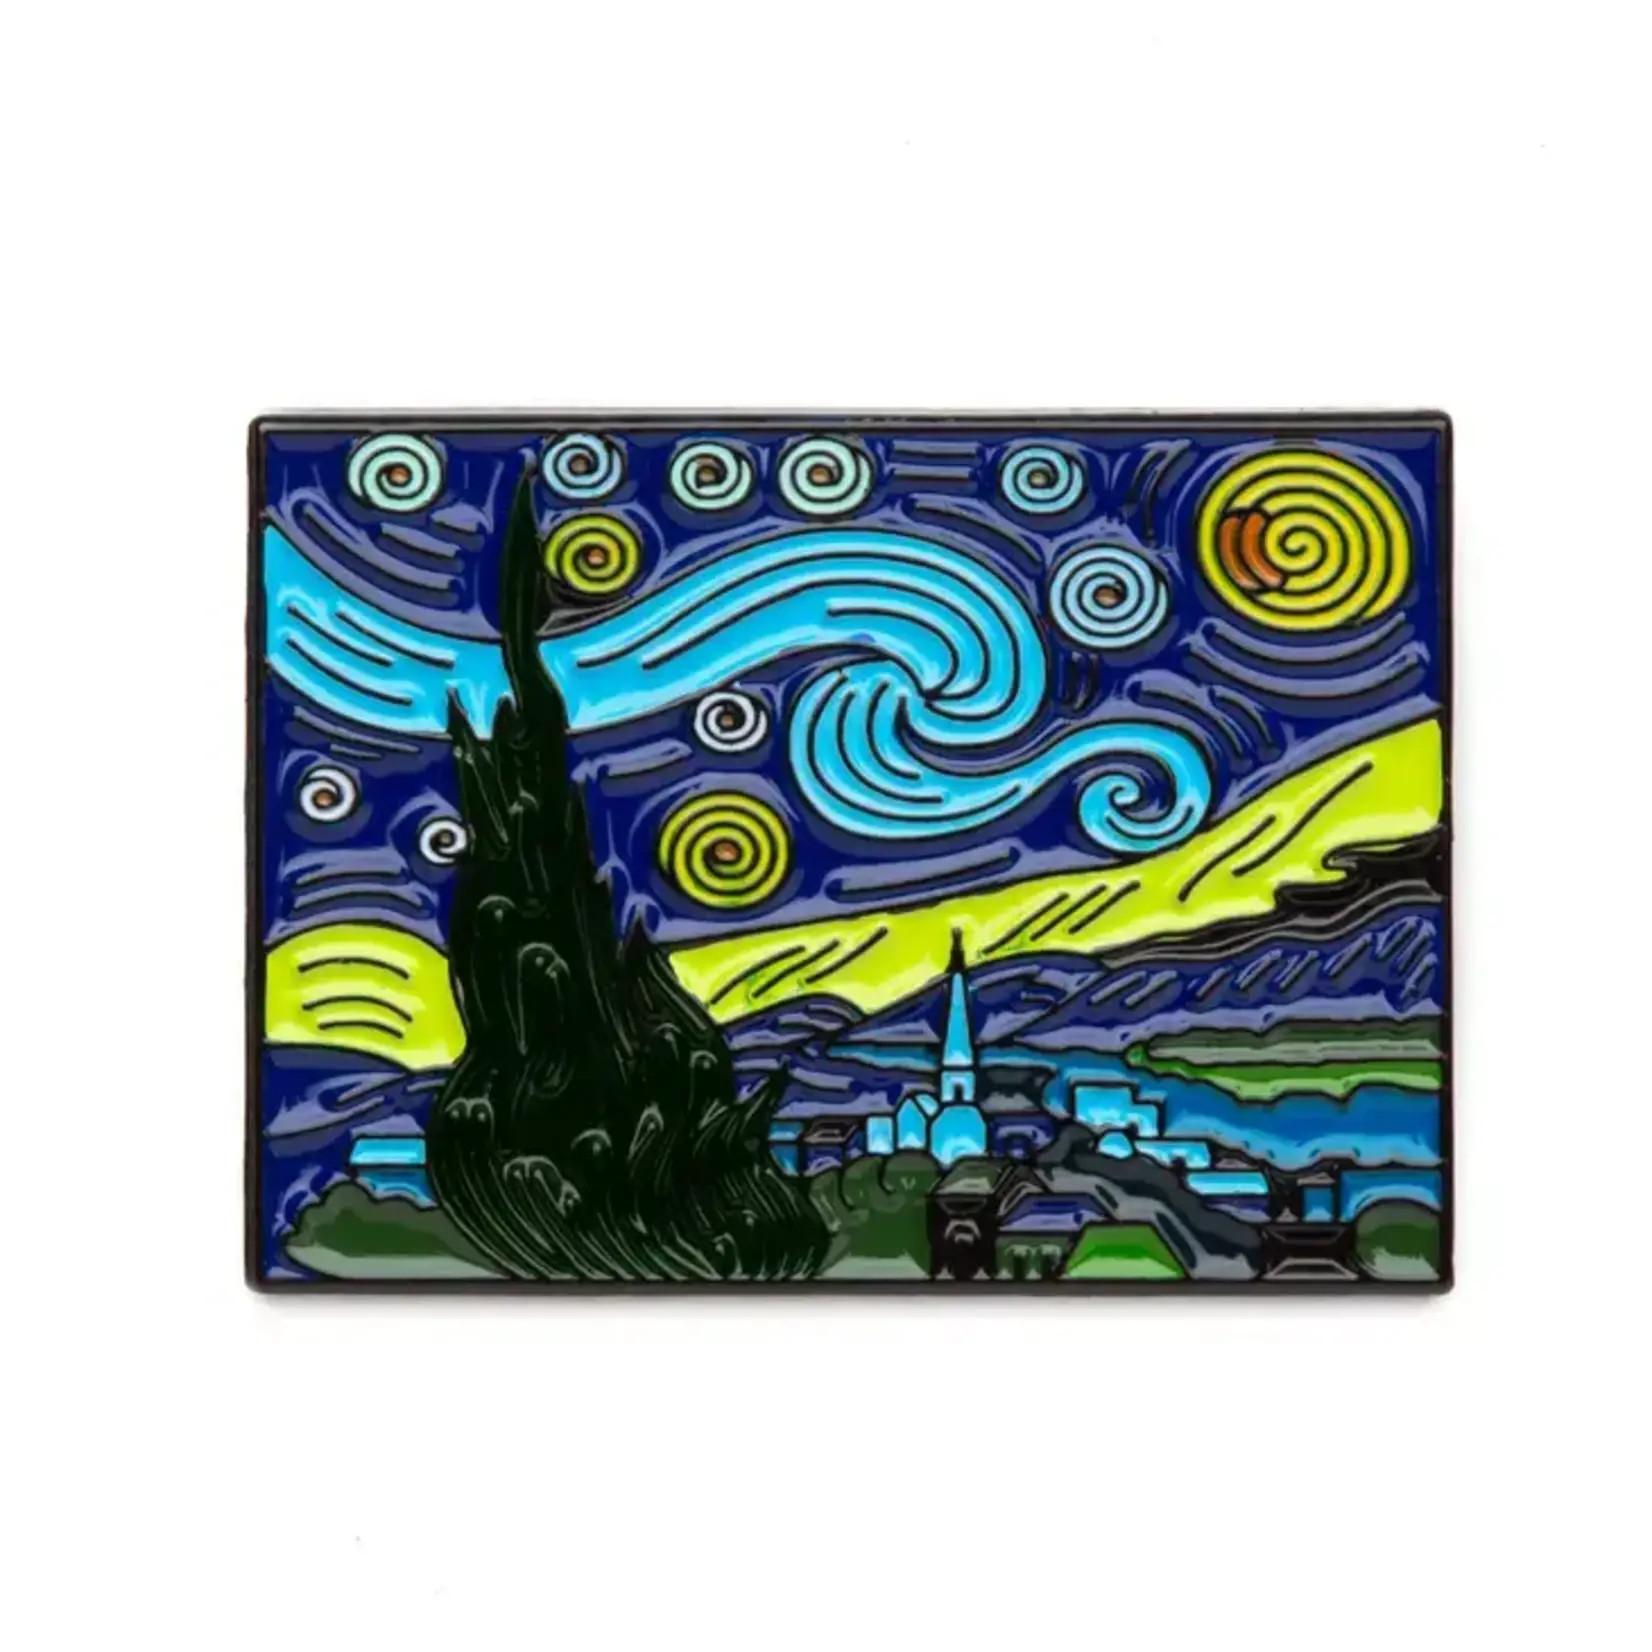 FAIRE (TODAY IS ART DAY) MAGNET  STARRY NIGHT VAN GOGH